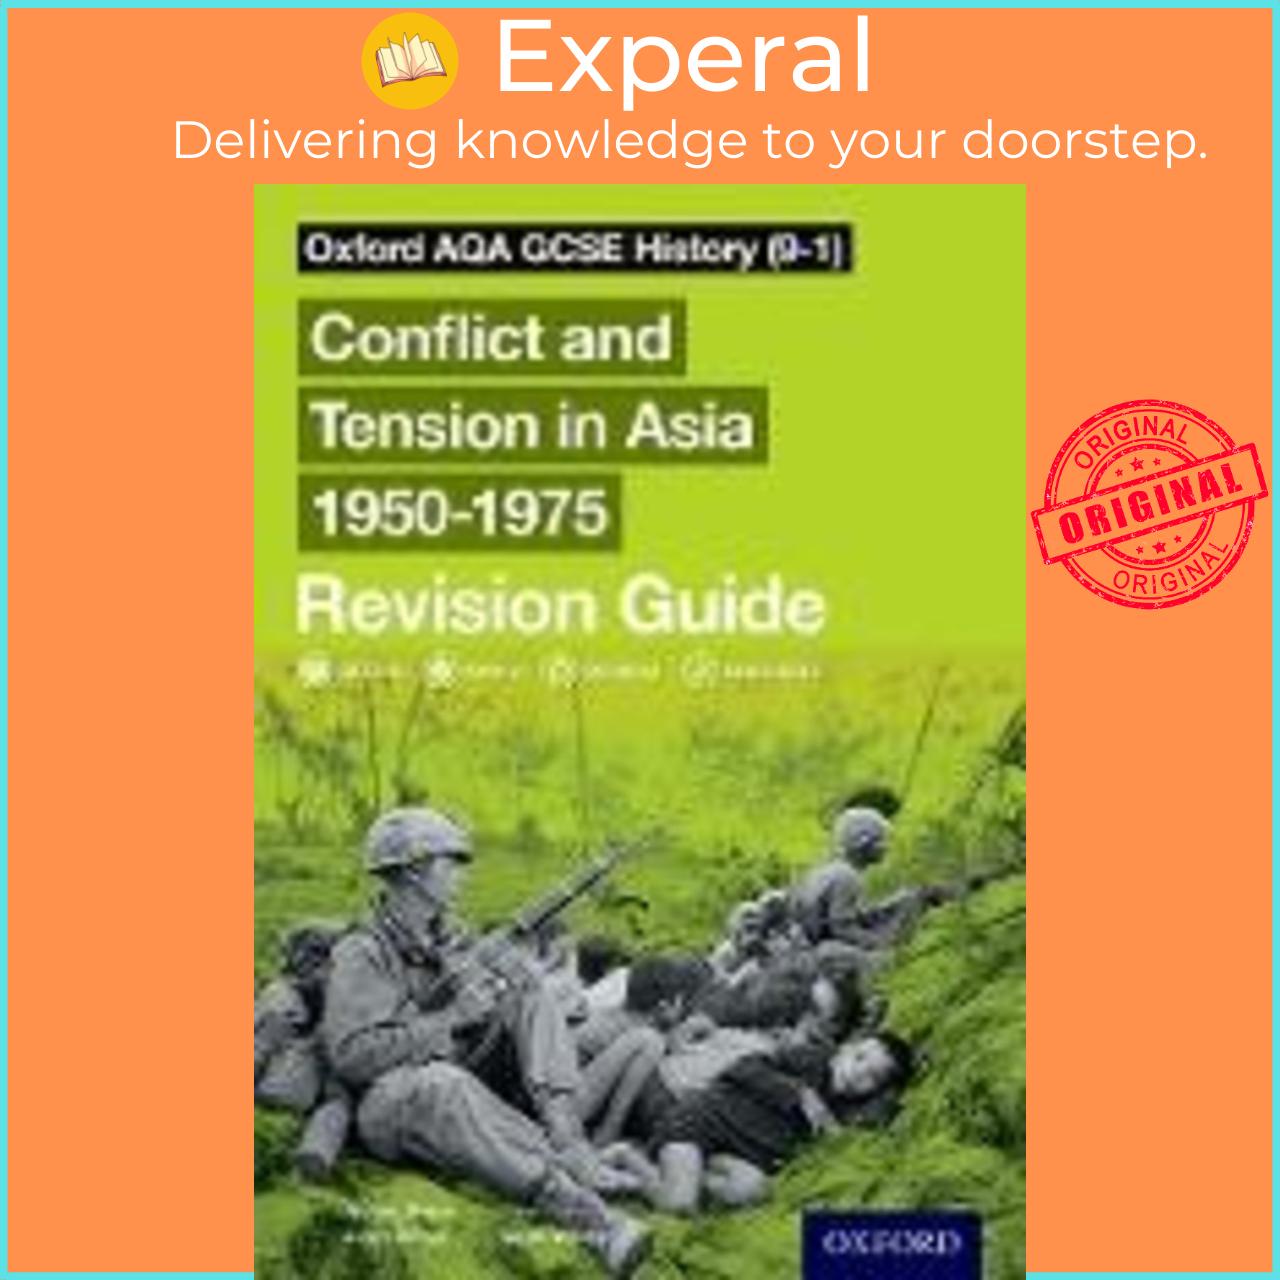 Sách - Oxford AQA GCSE History (9-1): Conflict and Tension in Asia 1950-1975 Re by Lindsay Bruce (UK edition, paperback)